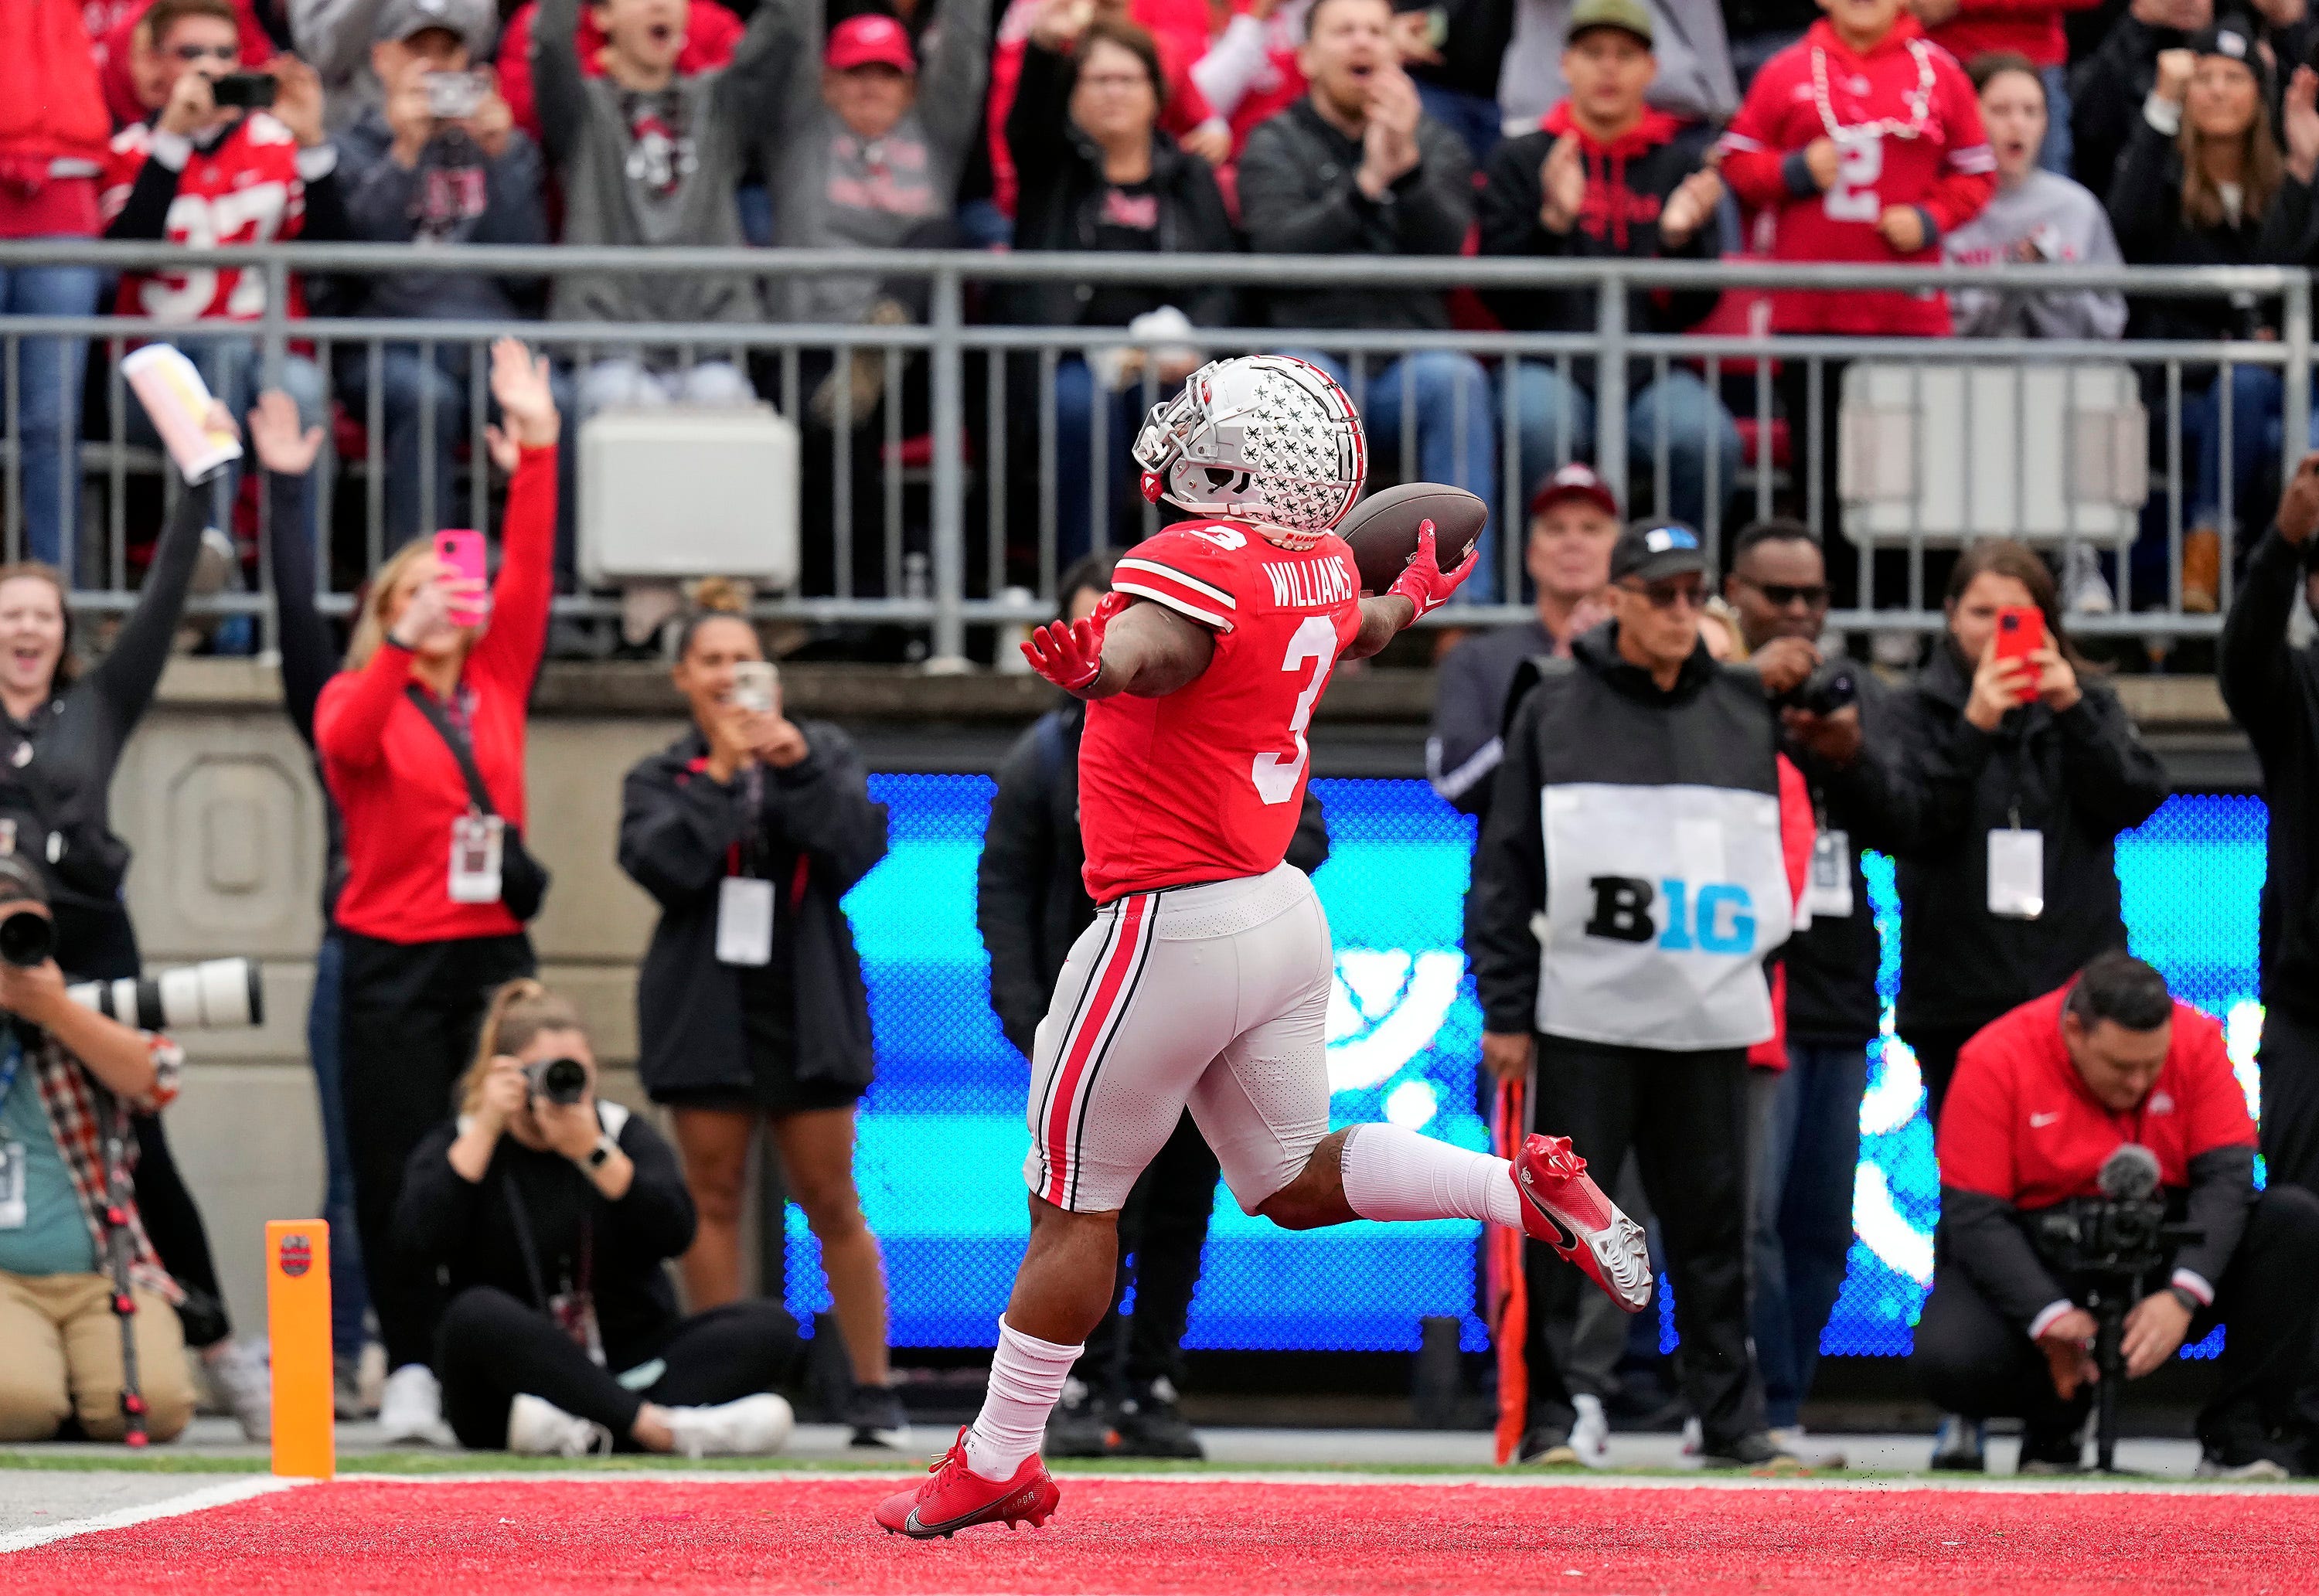 Ohio State RB Miyan Williams ties team record with five rushing touchdowns vs. Rutgers